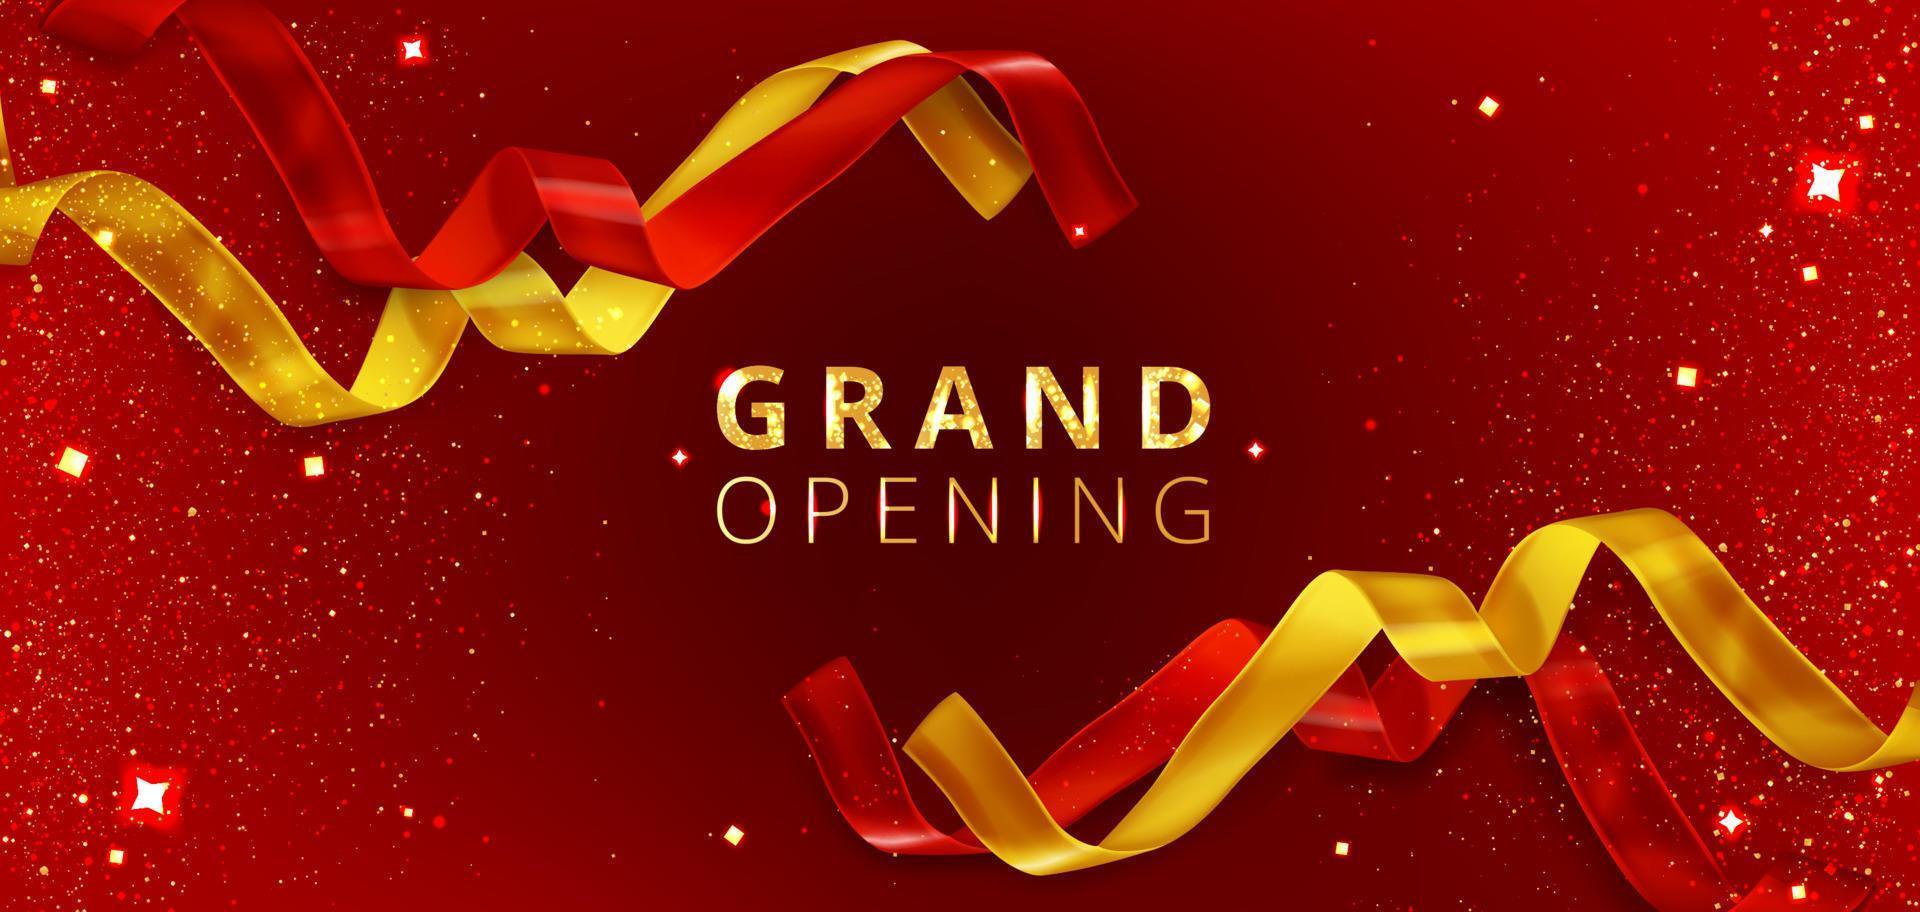 Grand opening event poster with cut ribbons vector